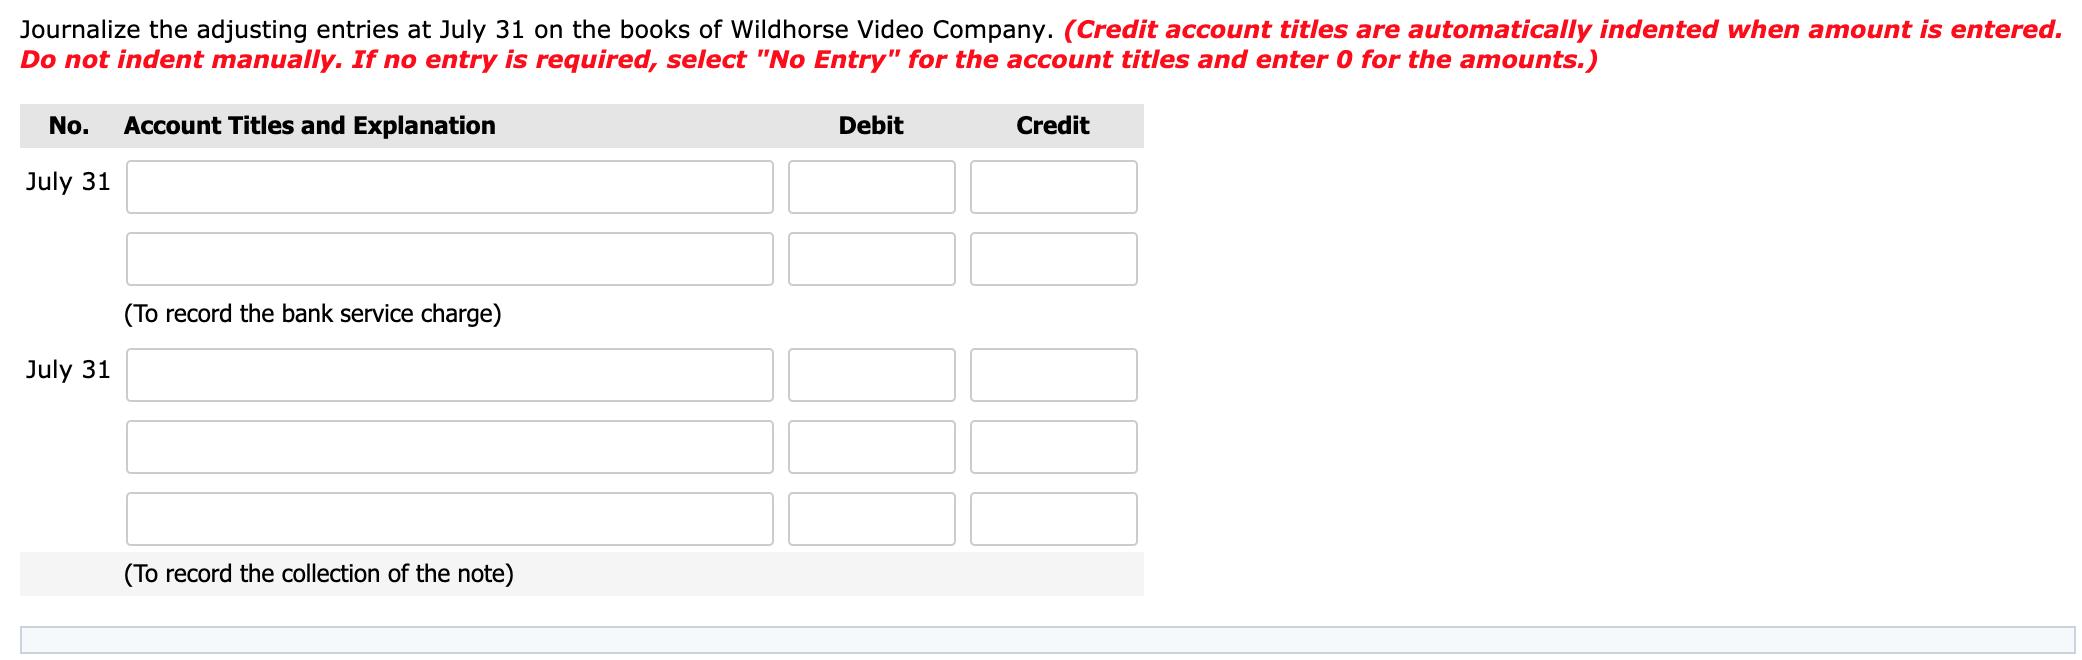 Journalize the adjusting entries at July 31 on the books of Wildhorse Video Company. (Credit account titles are automatically